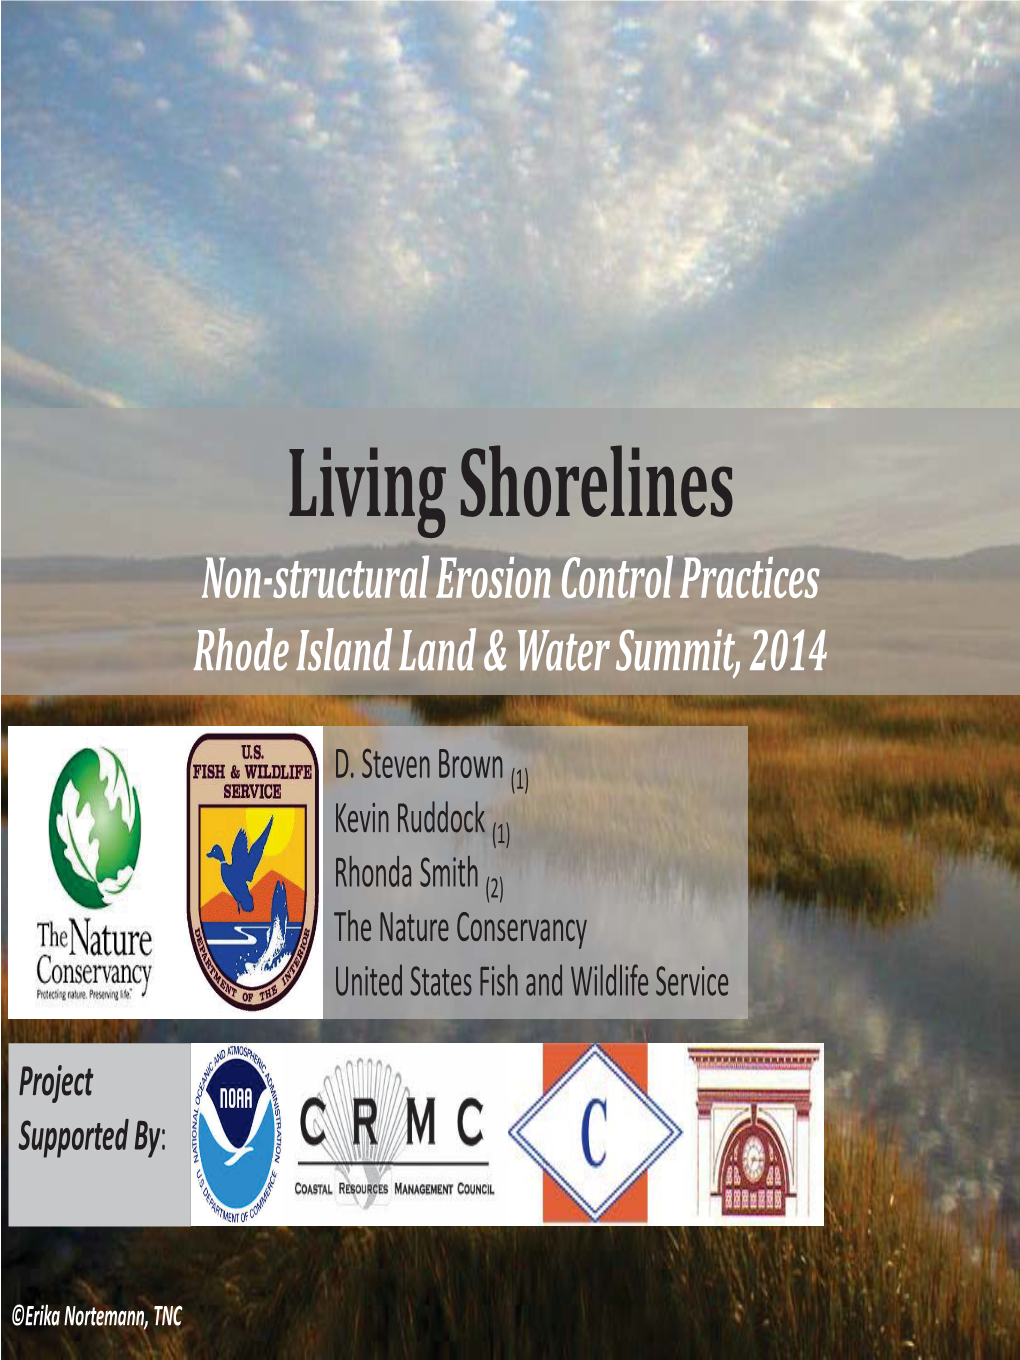 Living Shorelines Non-Structural Erosion Control Practices Rhode Island Land & Water Summit, 2014